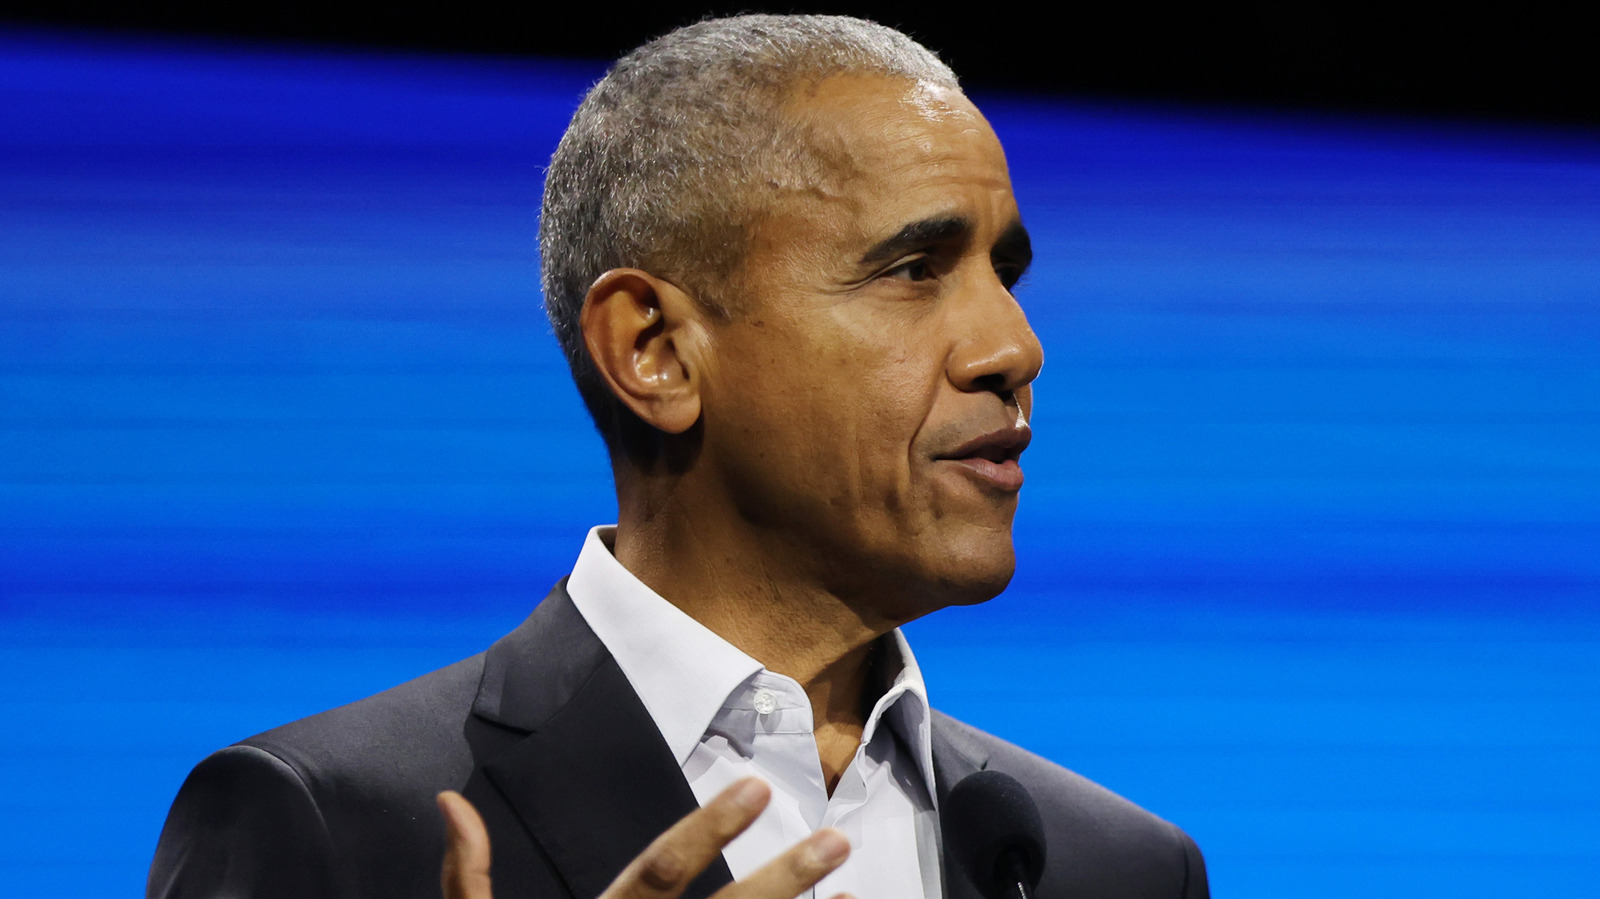 Obama's Letter To His Supposed Ex Once Caused A Big Stir About His Sexuality